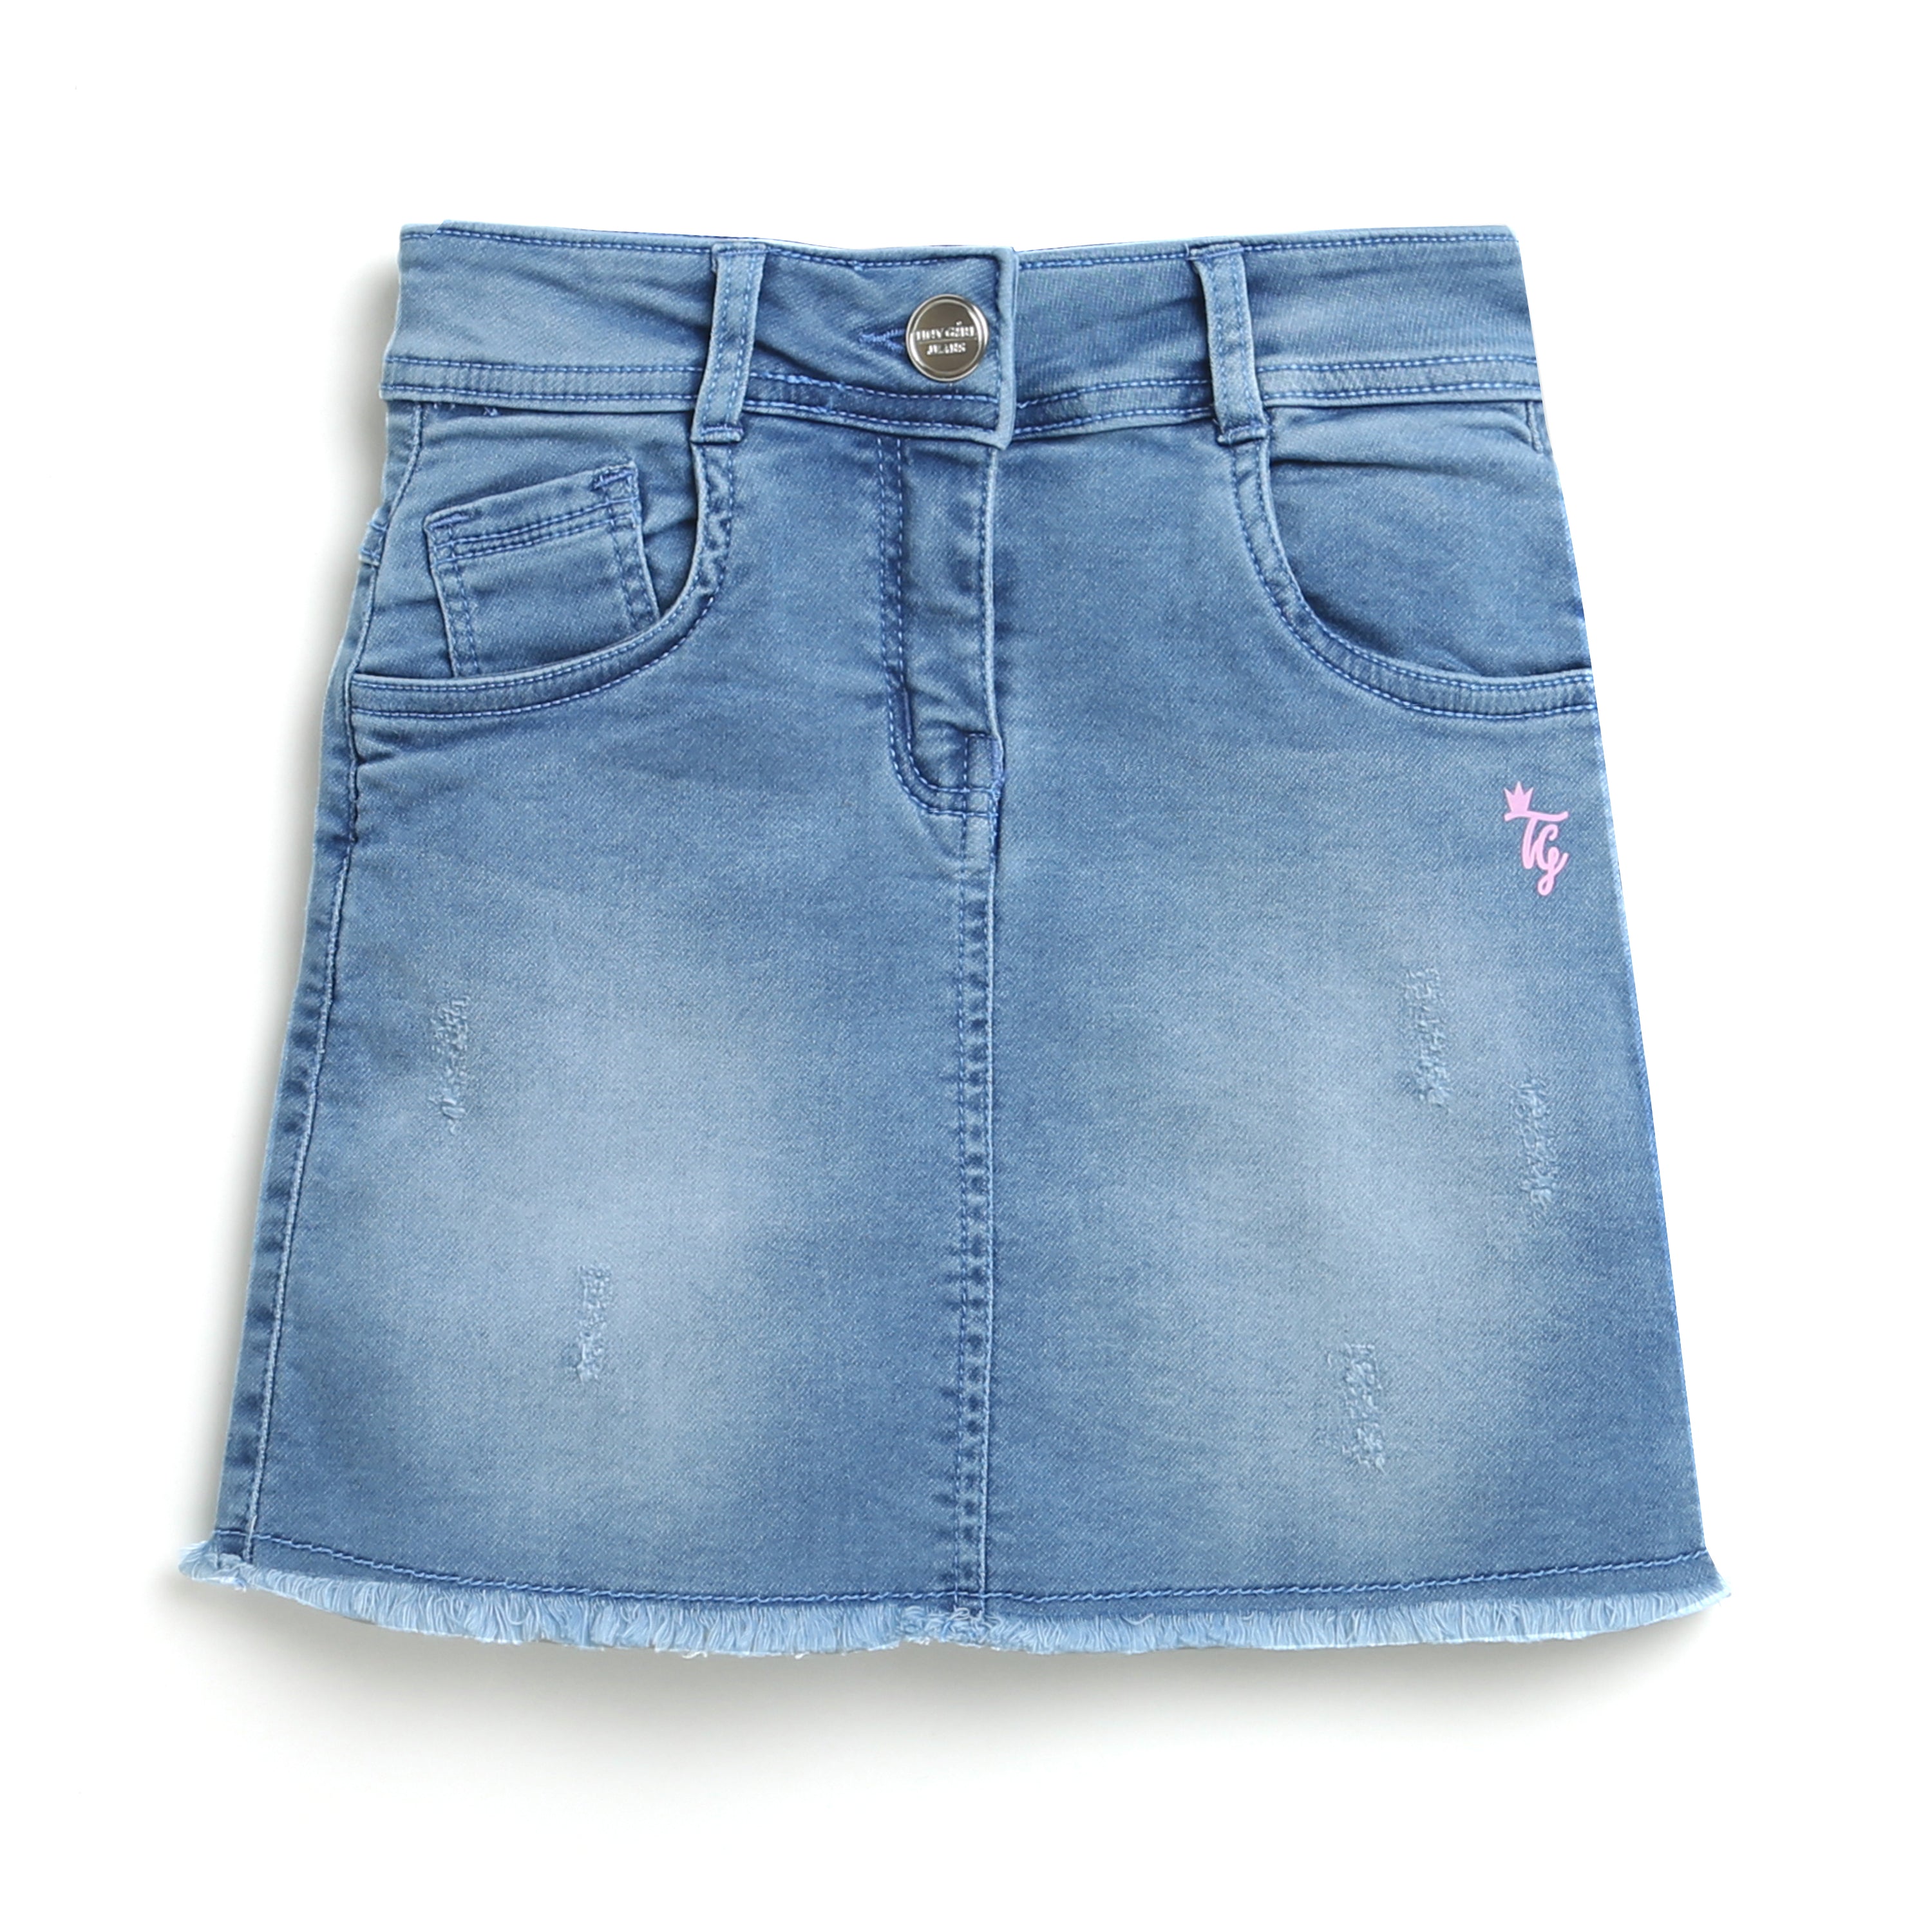 Classic Denim Skirt With Ripped Hemline With Pockets